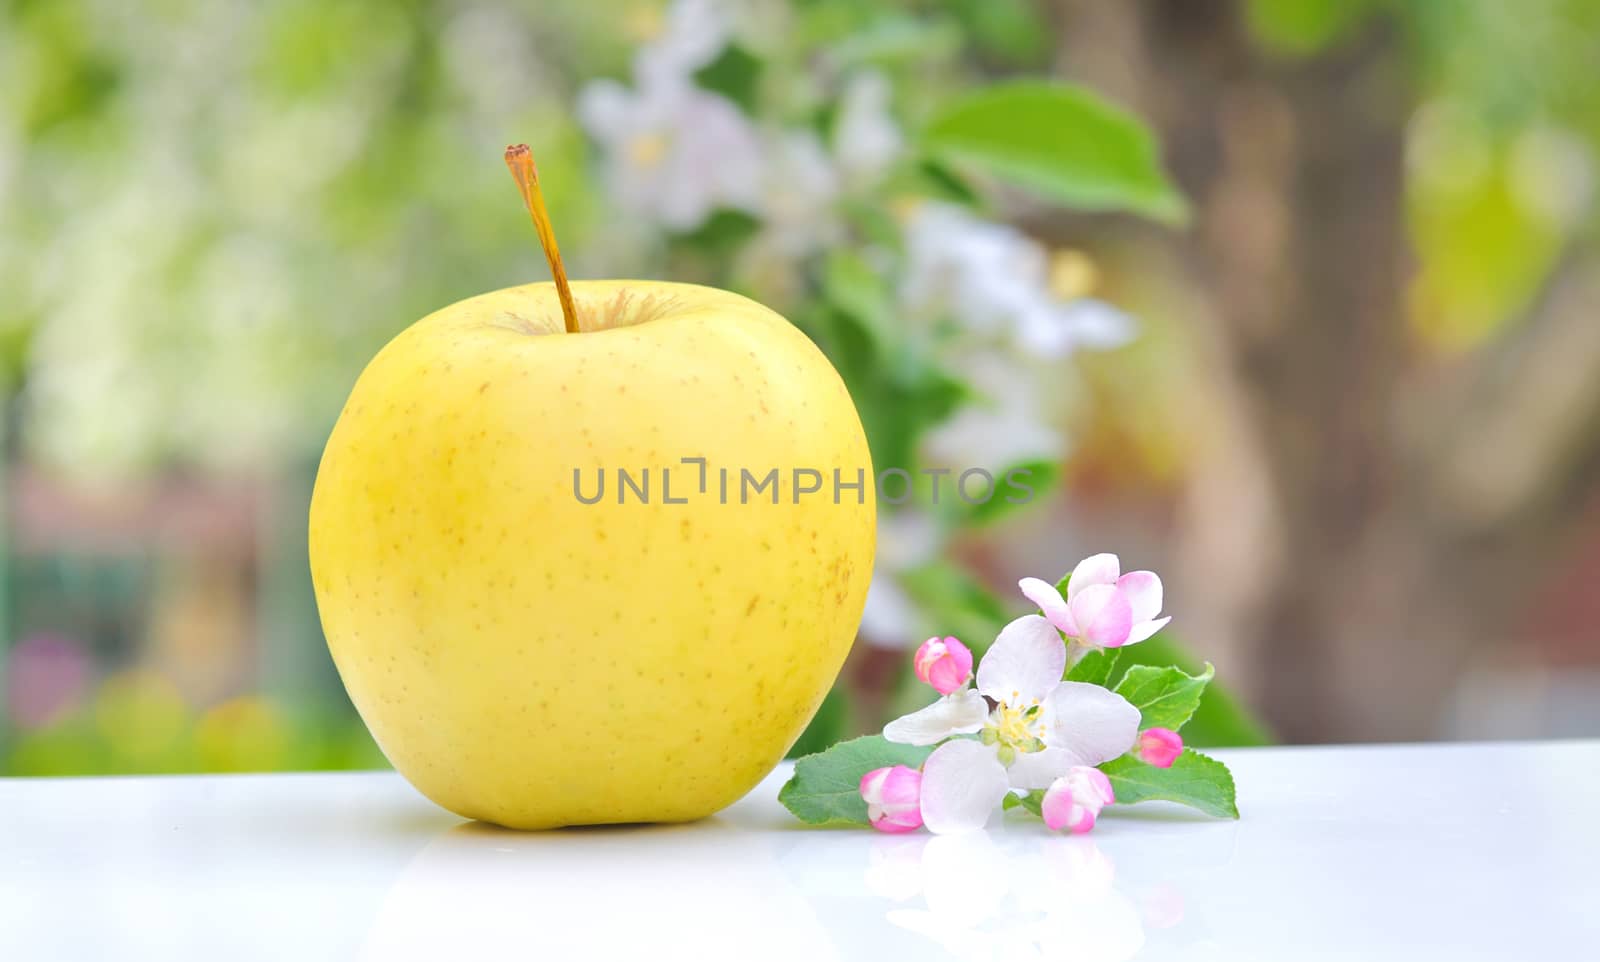 Apple and Flower Blossom